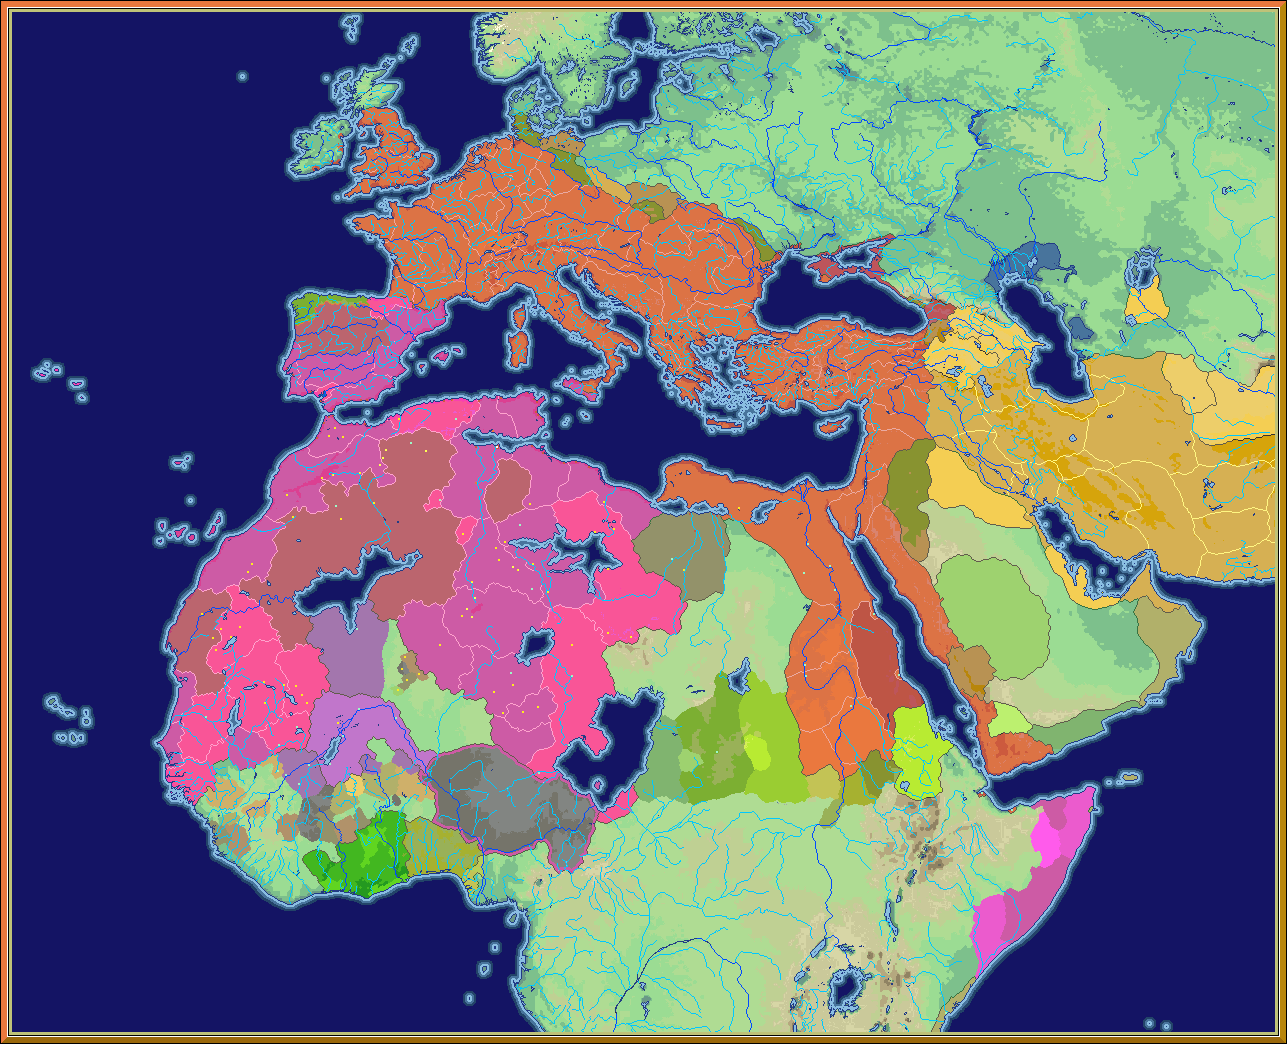 greater carthage 1 ROME2 c v5 comb.png